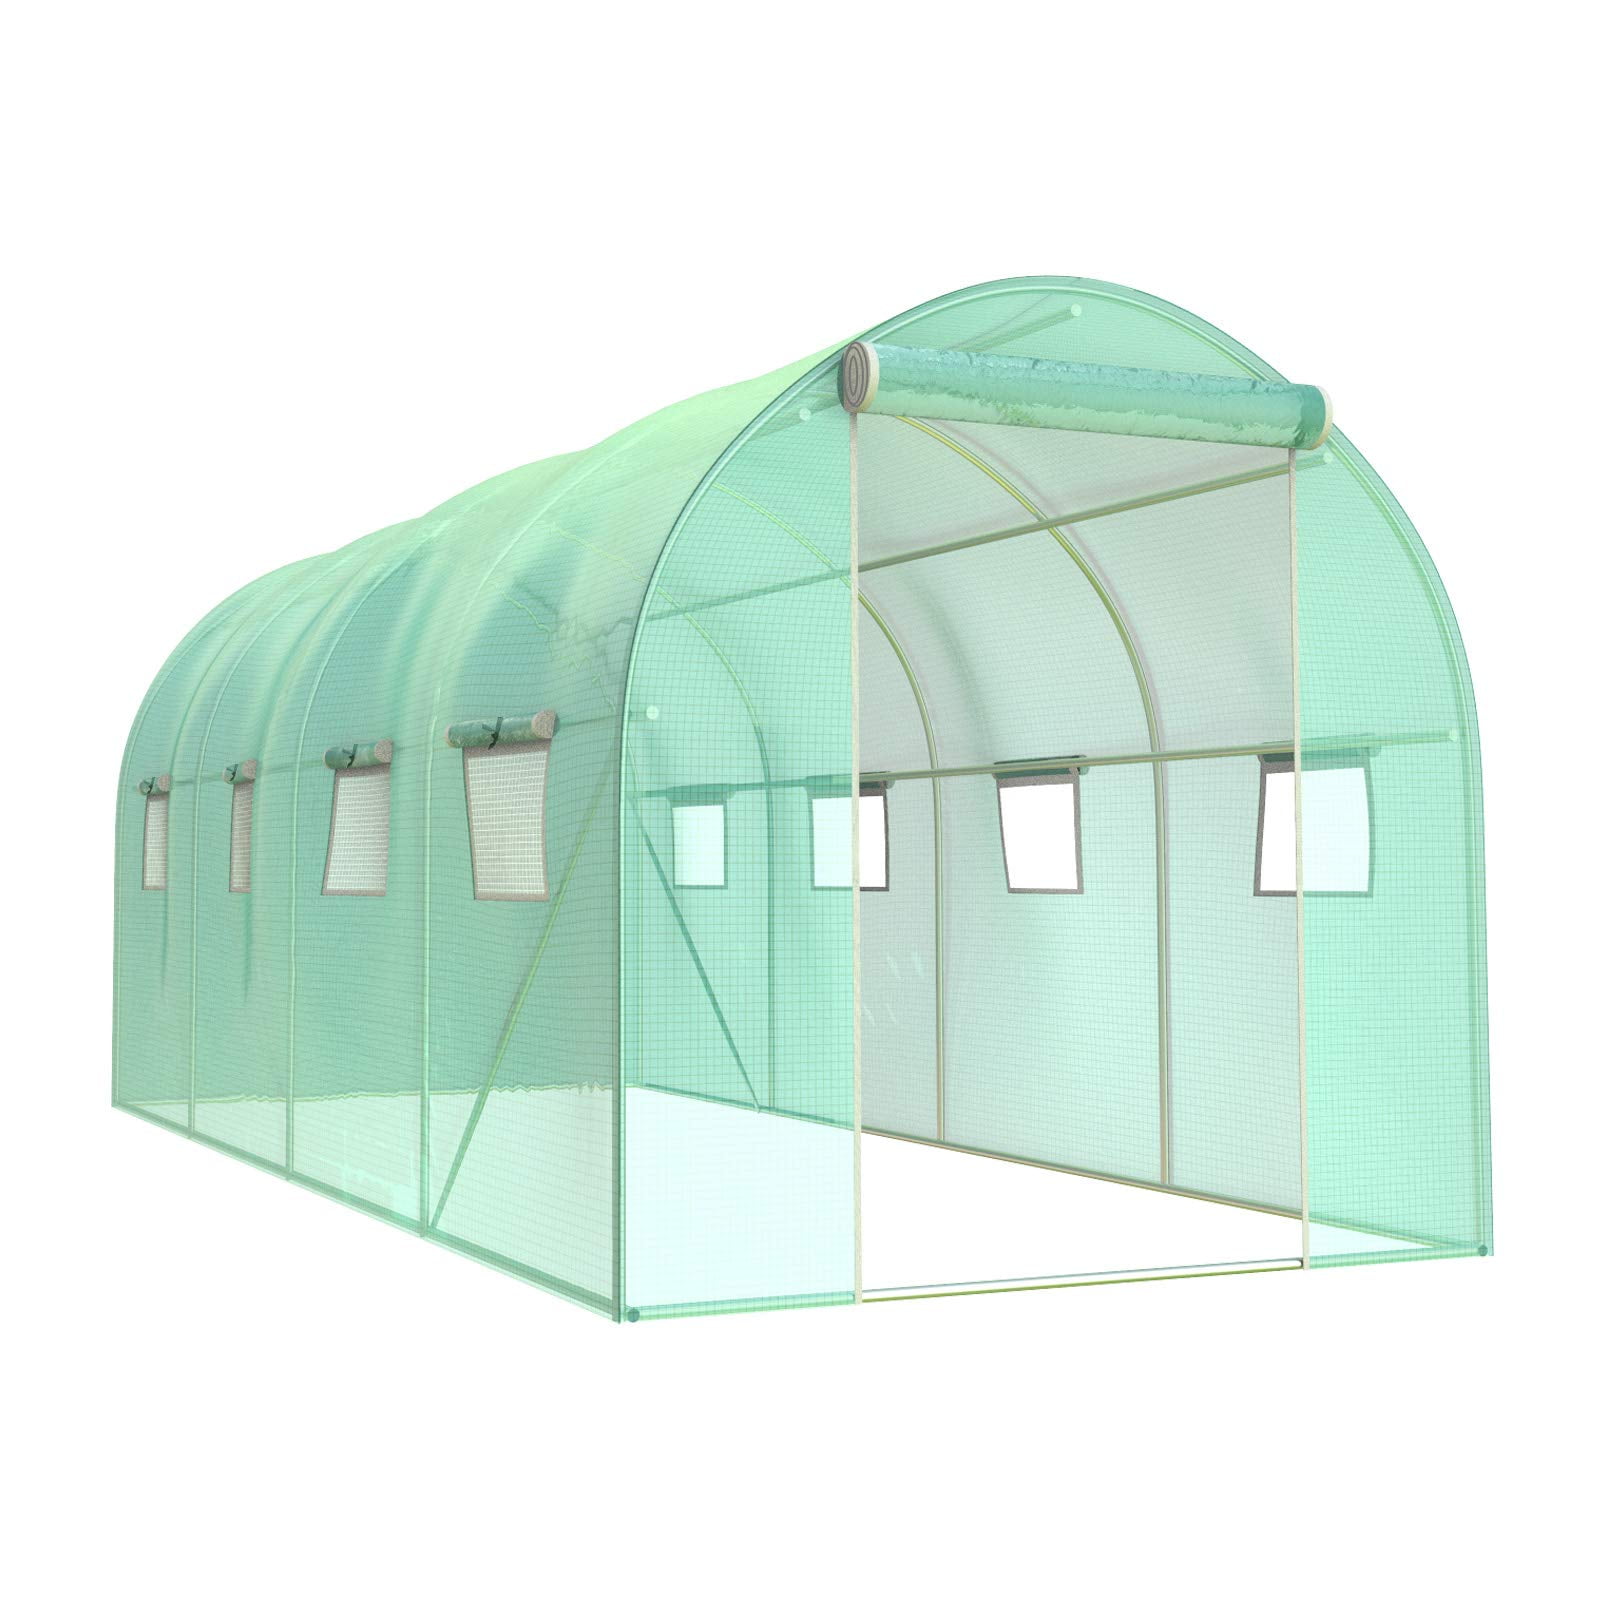 and Flowers Biltek 11ft Portable Walk-in Garden Greenhouse Outdoor Green House for Fruits Plants 11' Long x 10' Wide x 7' High Vegetables